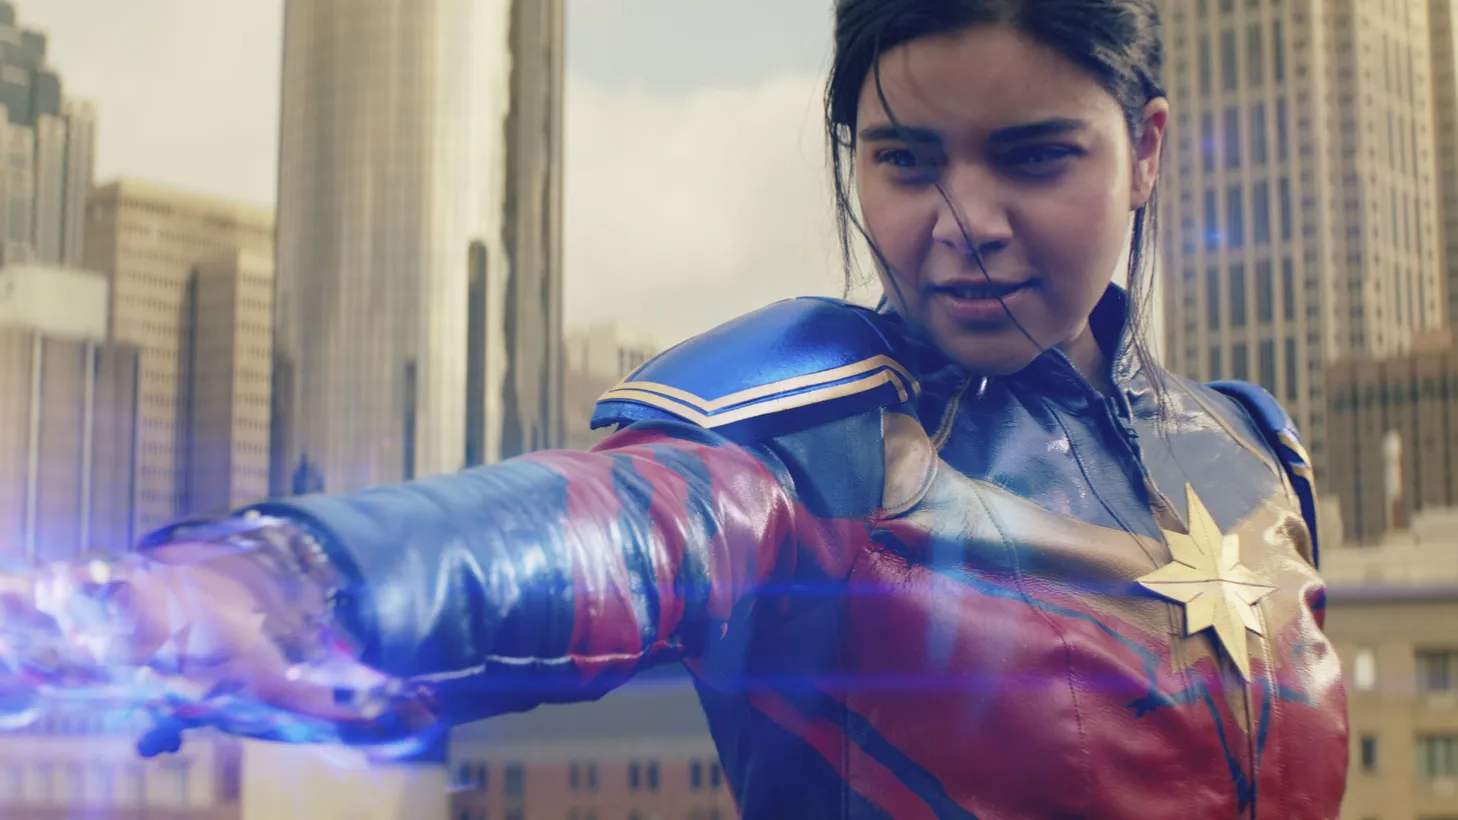 Iman Vellani plays Ms. Marvel/Kamala Khan in Sharmeen Obaid-Chinoy’s Disney+ show “Ms. Marvel.” Obaid-Chinoy says, “It's a dream to have validation that your music, your culture, your food, your textiles, the vibrancy of your culture is being celebrated.”